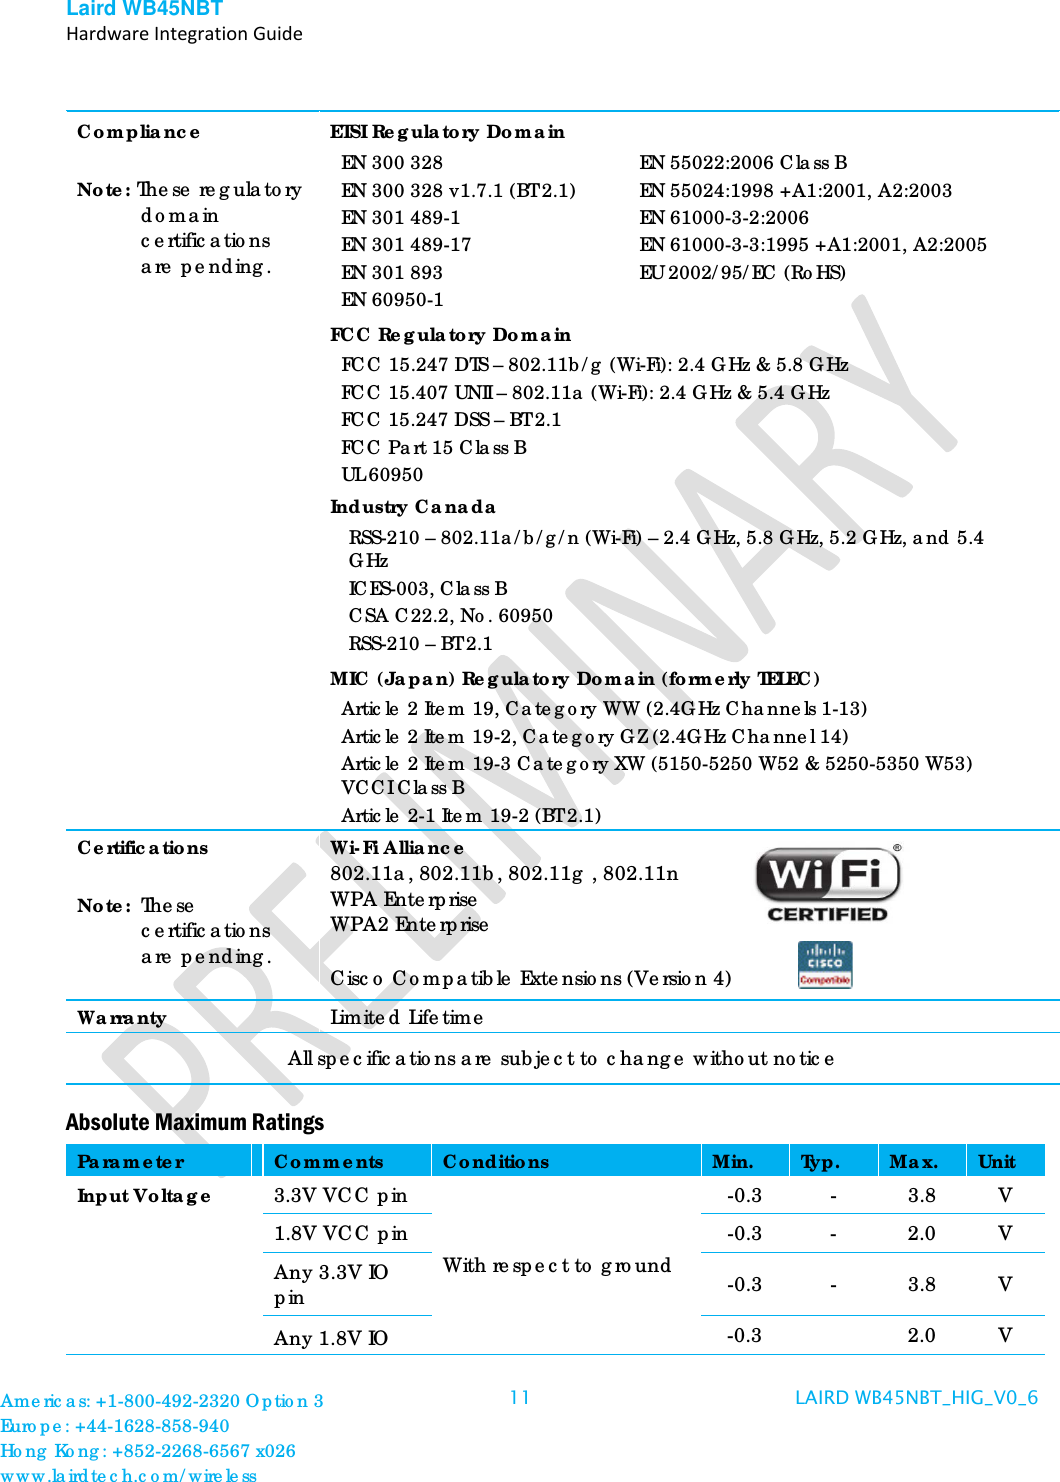 Laird WB45NBT   Hardware Integration Guide  Compliance  Note: These regulatory domain certifications are pending. ETSI Regulatory Domain EN 300 328 EN 300 328 v1.7.1 (BT 2.1) EN 301 489-1 EN 301 489-17 EN 301 893 EN 60950-1 EN 55022:2006 Class B EN 55024:1998 +A1:2001, A2:2003 EN 61000-3-2:2006 EN 61000-3-3:1995 +A1:2001, A2:2005 EU 2002/95/EC (RoHS) FCC Regulatory Domain FCC 15.247 DTS – 802.11b/g (Wi-Fi): 2.4 GHz &amp; 5.8 GHz FCC 15.407 UNII – 802.11a (Wi-Fi): 2.4 GHz &amp; 5.4 GHz FCC 15.247 DSS – BT 2.1  FCC Part 15 Class B UL 60950 Industry Canada RSS-210 – 802.11a/b/g/n (Wi-Fi) – 2.4 GHz, 5.8 GHz, 5.2 GHz, and 5.4 GHz ICES-003, Class B CSA C22.2, No. 60950 RSS-210 – BT 2.1  MIC (Japan) Regulatory Domain (formerly TELEC) Article 2 Item 19, Category WW (2.4GHz Channels 1-13) Article 2 Item 19-2, Category GZ (2.4GHz Channel 14) Article 2 Item 19-3 Category XW (5150-5250 W52 &amp; 5250-5350 W53) VCCI Class B Article 2-1 Item 19-2 (BT 2.1)  Certifications  Note:  These certifications are pending.  Wi-Fi Alliance 802.11a, 802.11b, 802.11g , 802.11n WPA Enterprise  WPA2 Enterprise    Cisco Compatible Extensions (Version 4) Warranty Limited Lifetime All specifications are subject to change without notice Absolute Maximum Ratings Parameter Comments Conditions Min. Typ. Max. Unit Input Voltage 3.3V VCC pin With respect to ground -0.3  -  3.8  V 1.8V VCC pin  -0.3  -  2.0  V Any 3.3V IO pin -0.3  -  3.8  V Any 1.8V IO  -0.3    2.0  V Americas: +1-800-492-2320 Option 3 Europe: +44-1628-858-940 Hong Kong: +852-2268-6567 x026 www.lairdtech.com/wireless 11 LAIRD WB45NBT_HIG_V0_6   